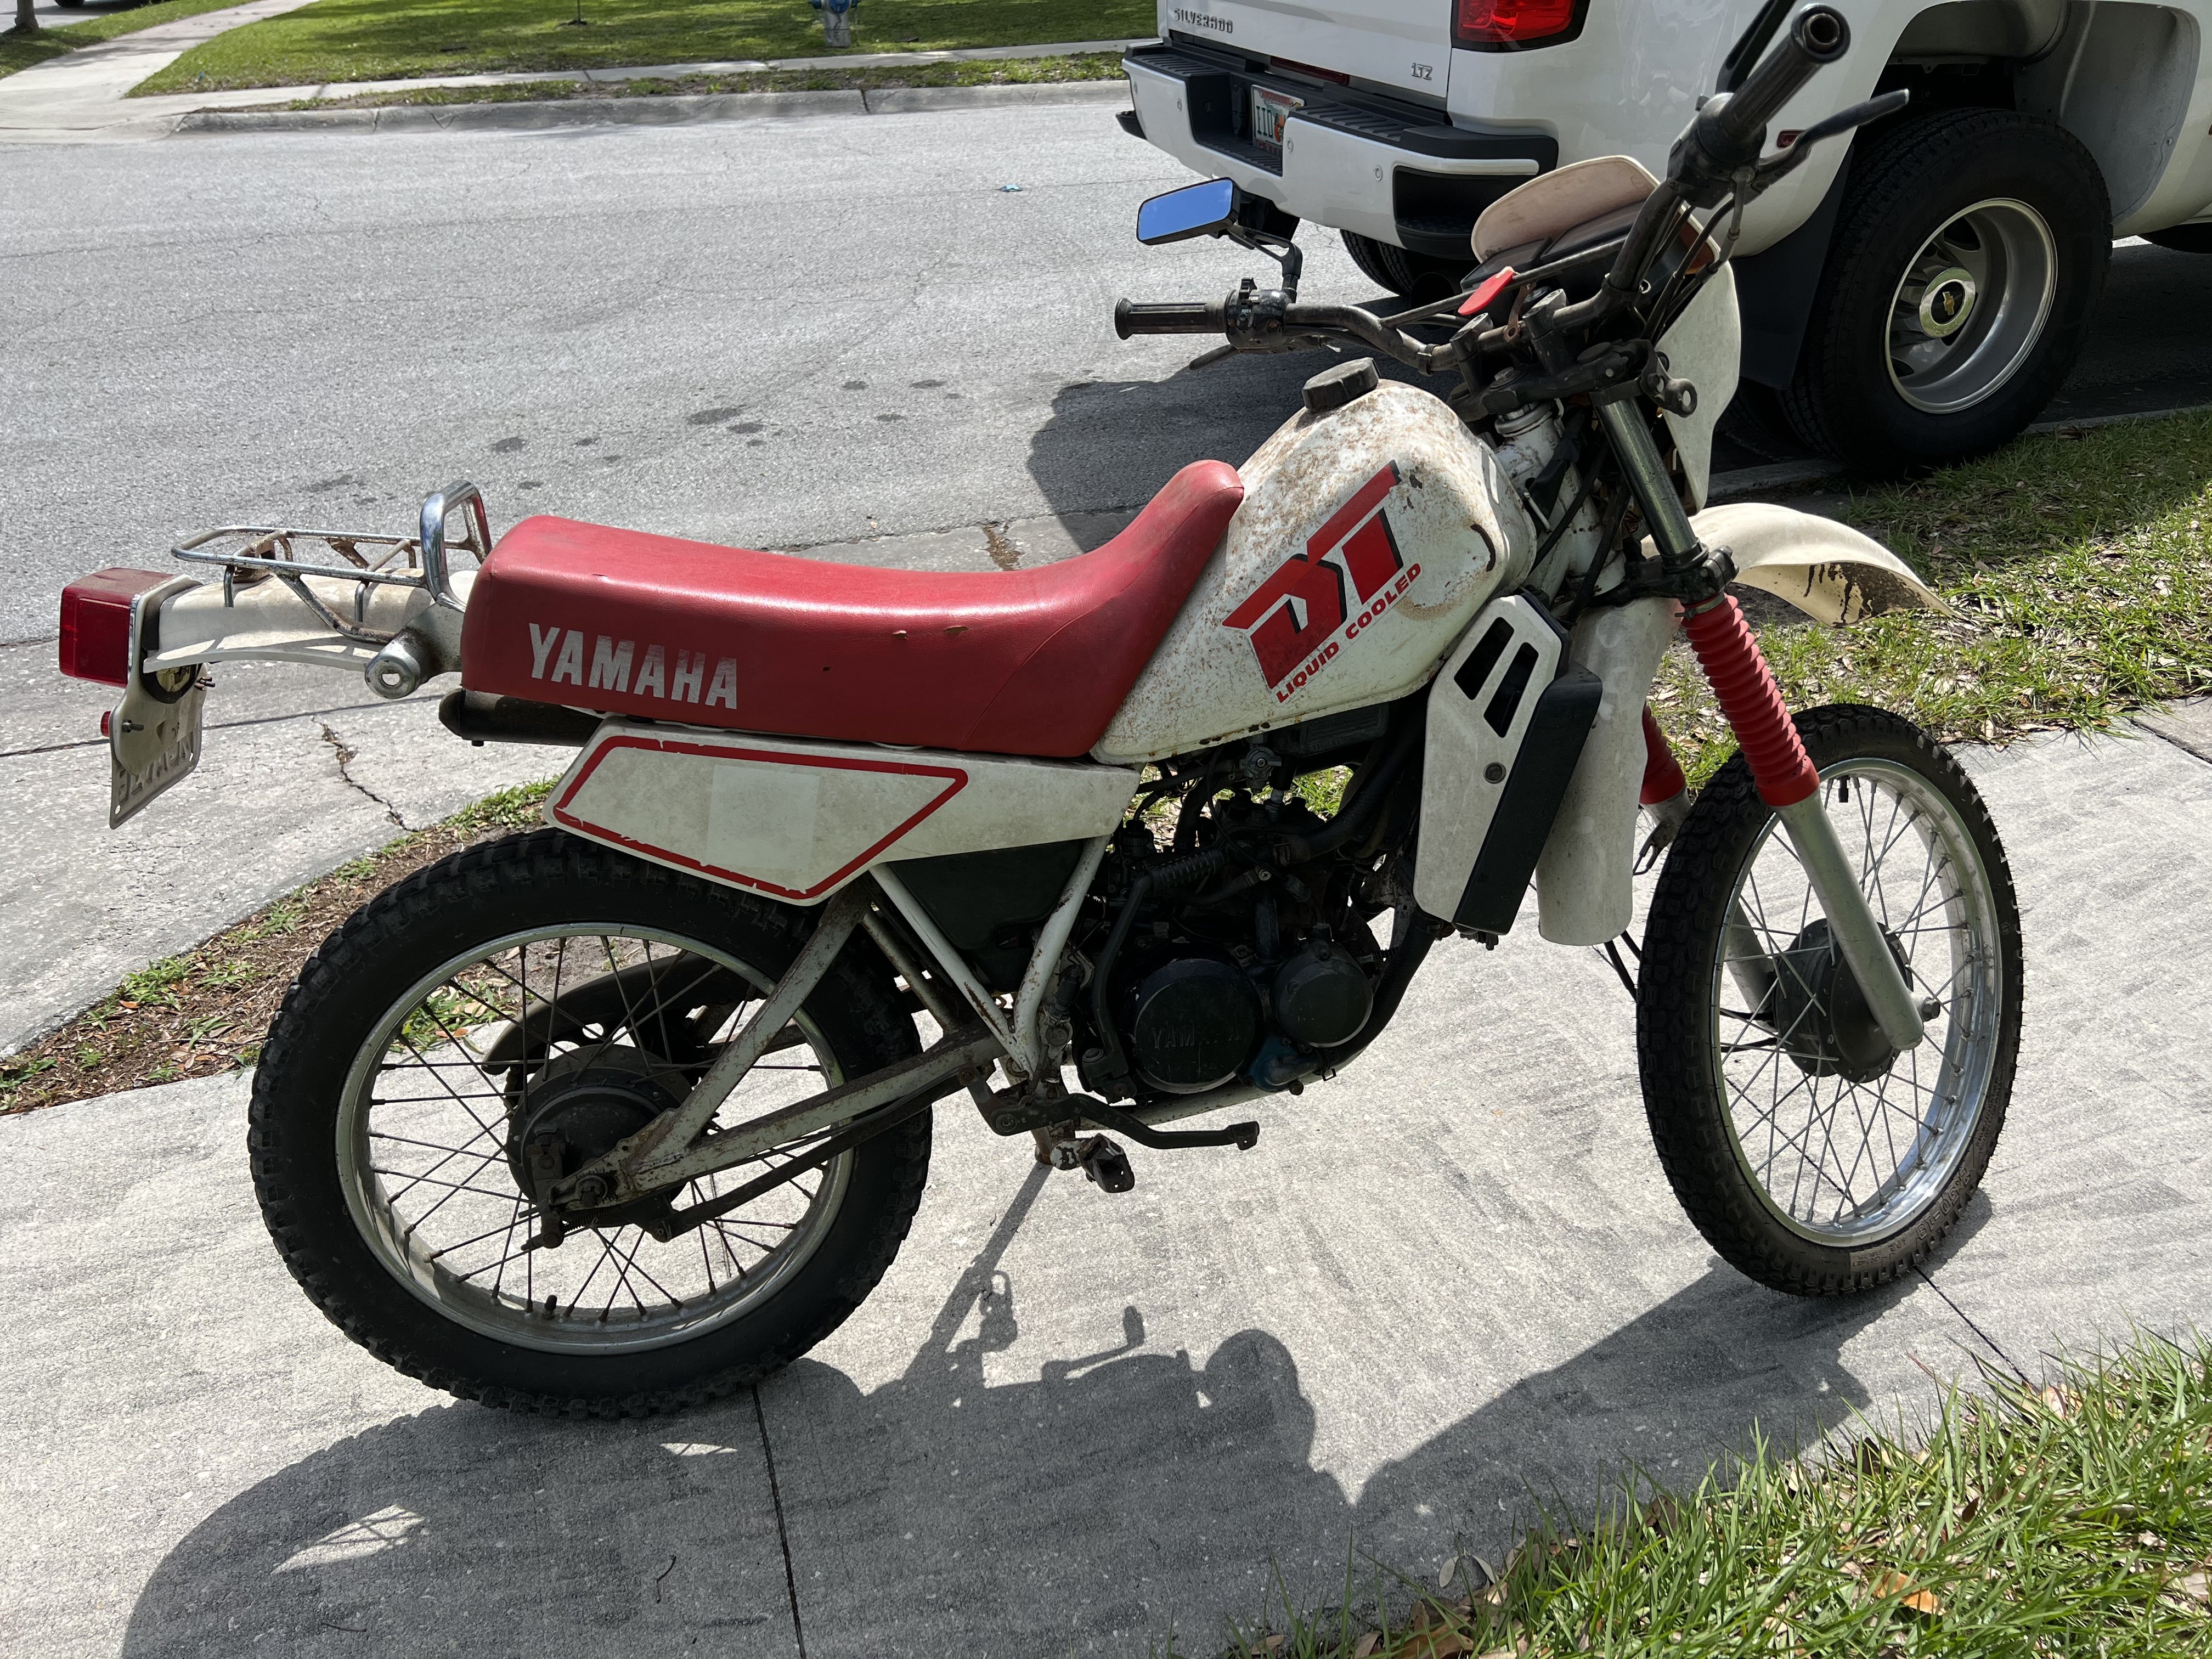 88 Yamaha DT50 SOLD - The Sales Floor -- For Sale/Wanted 